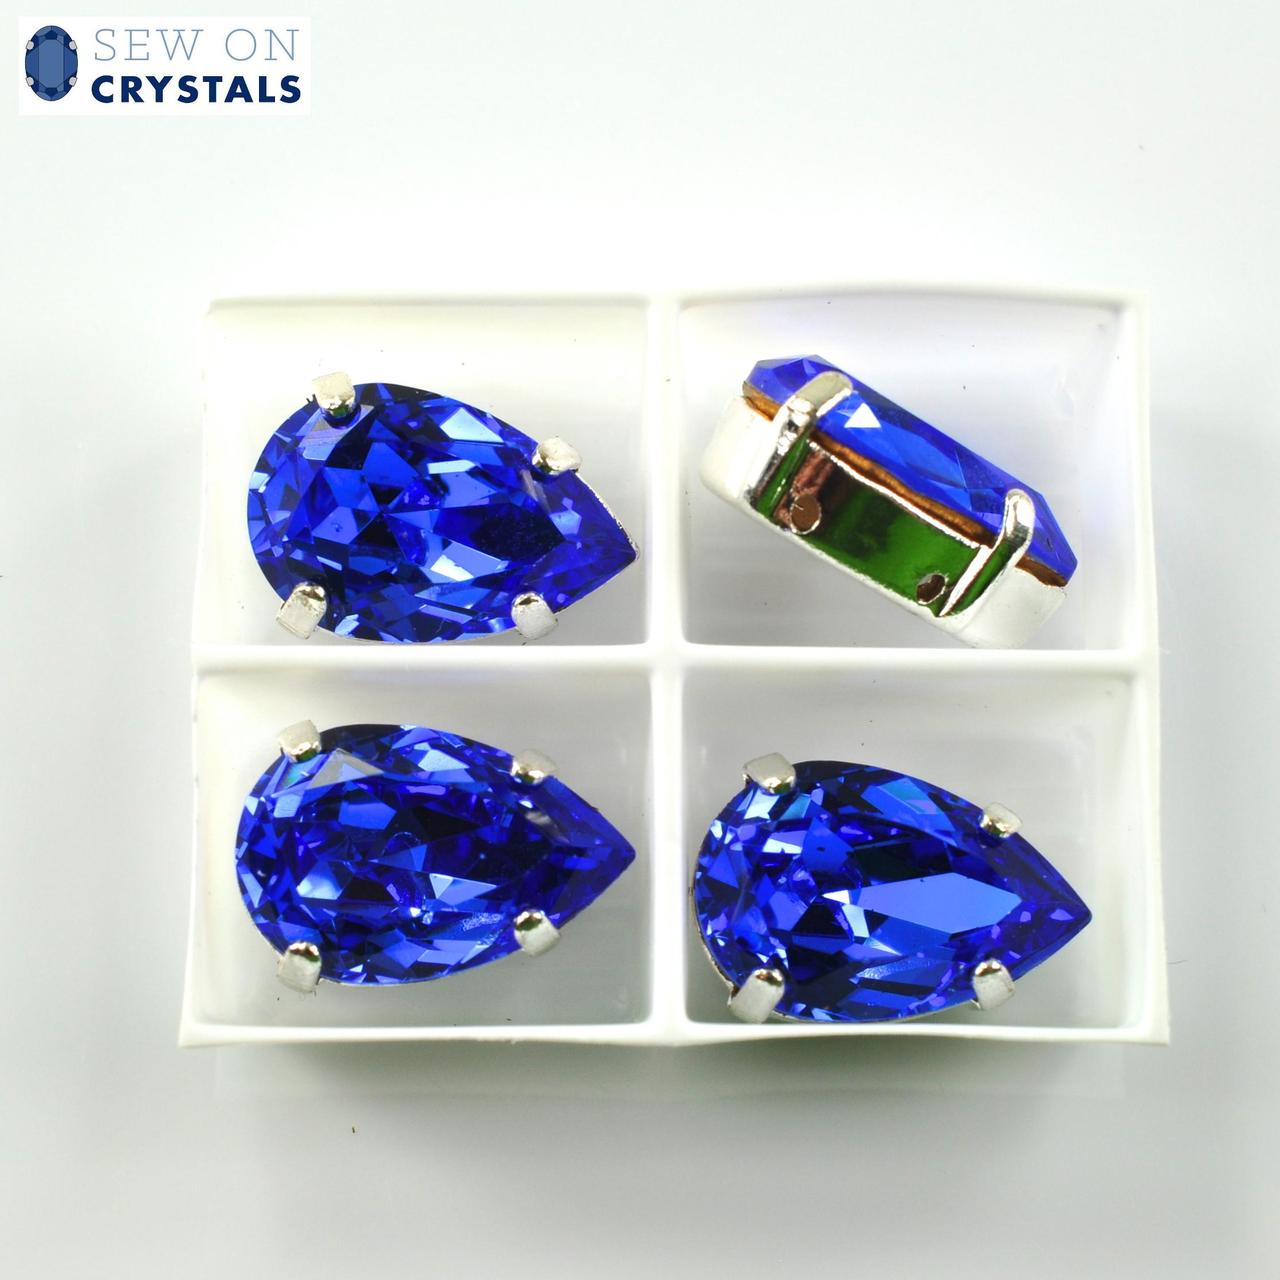 Sapphire 13x8.5mm Pear Sew On Crystals - 4 Pieces